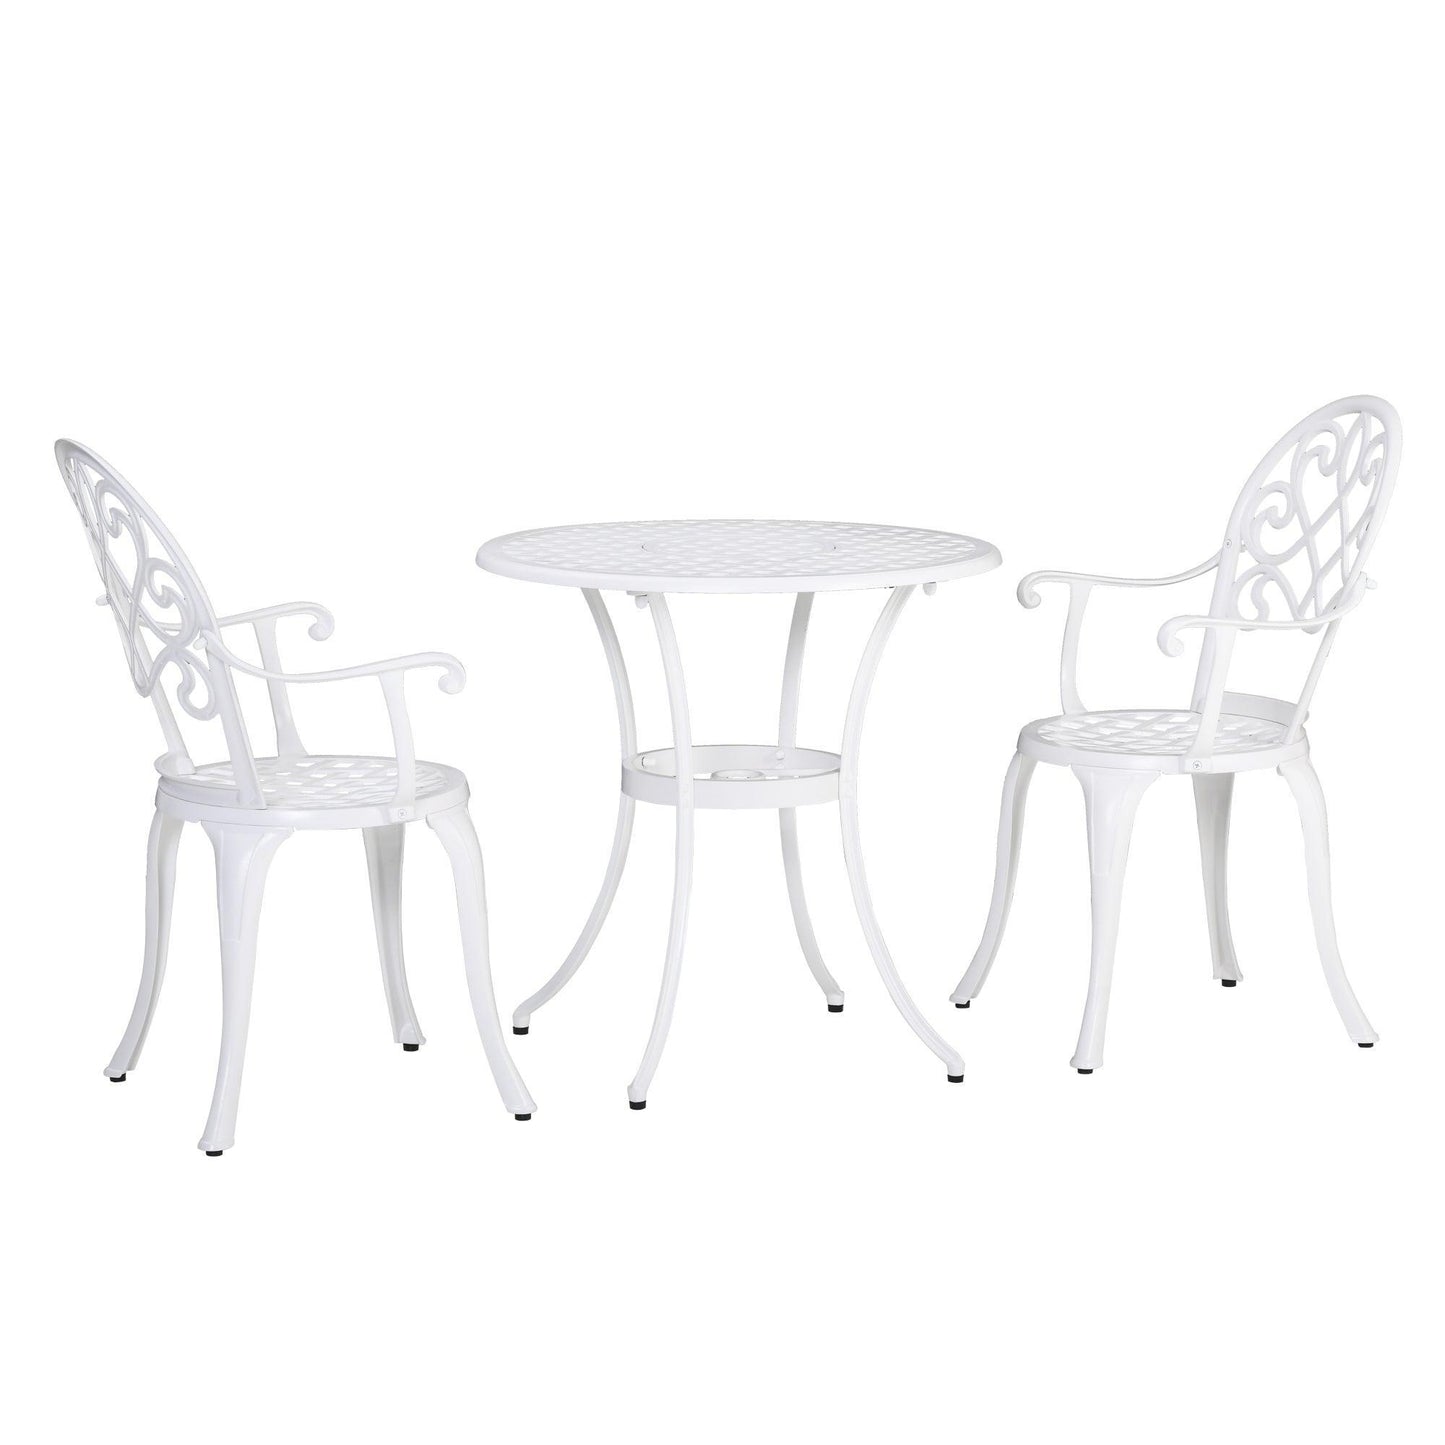 Outsunny Outdoor Bistro Set - Round Table & 2 Chairs - ALL4U RETAILER LTD